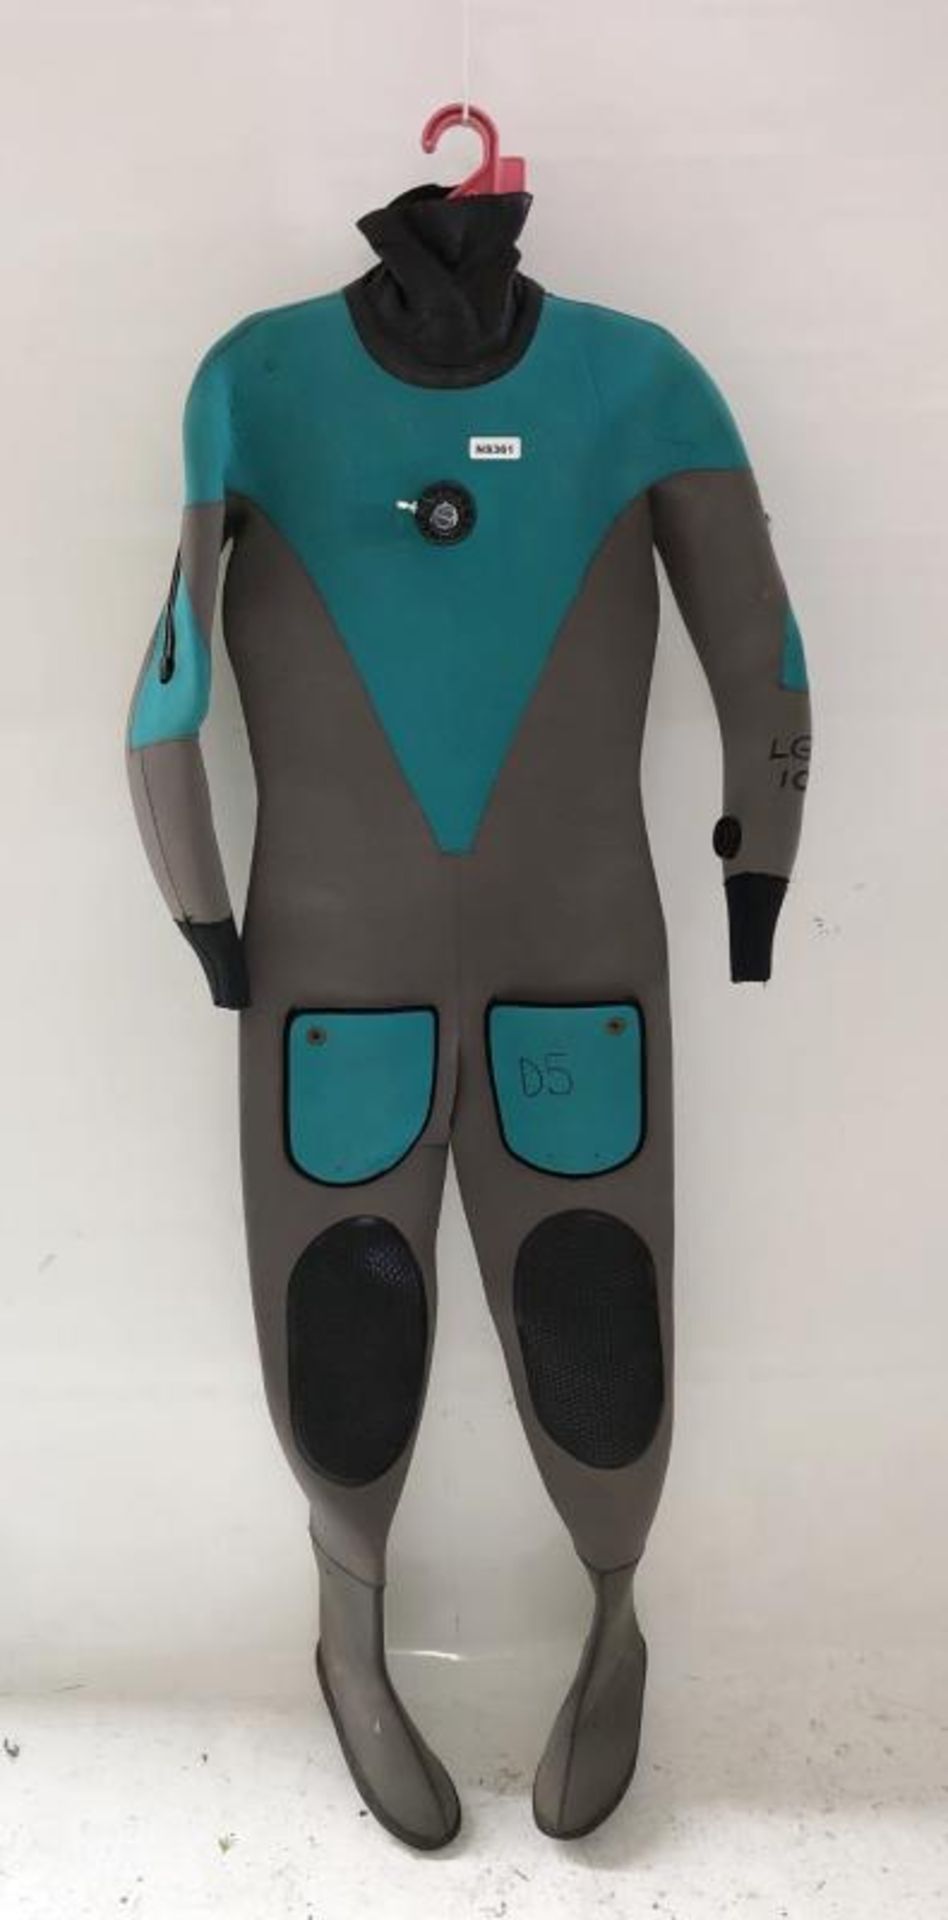 1 x Full Grey and Turquoise Wetsuit - Ref: NS361 - CL349 - Location: Altrincham WA14